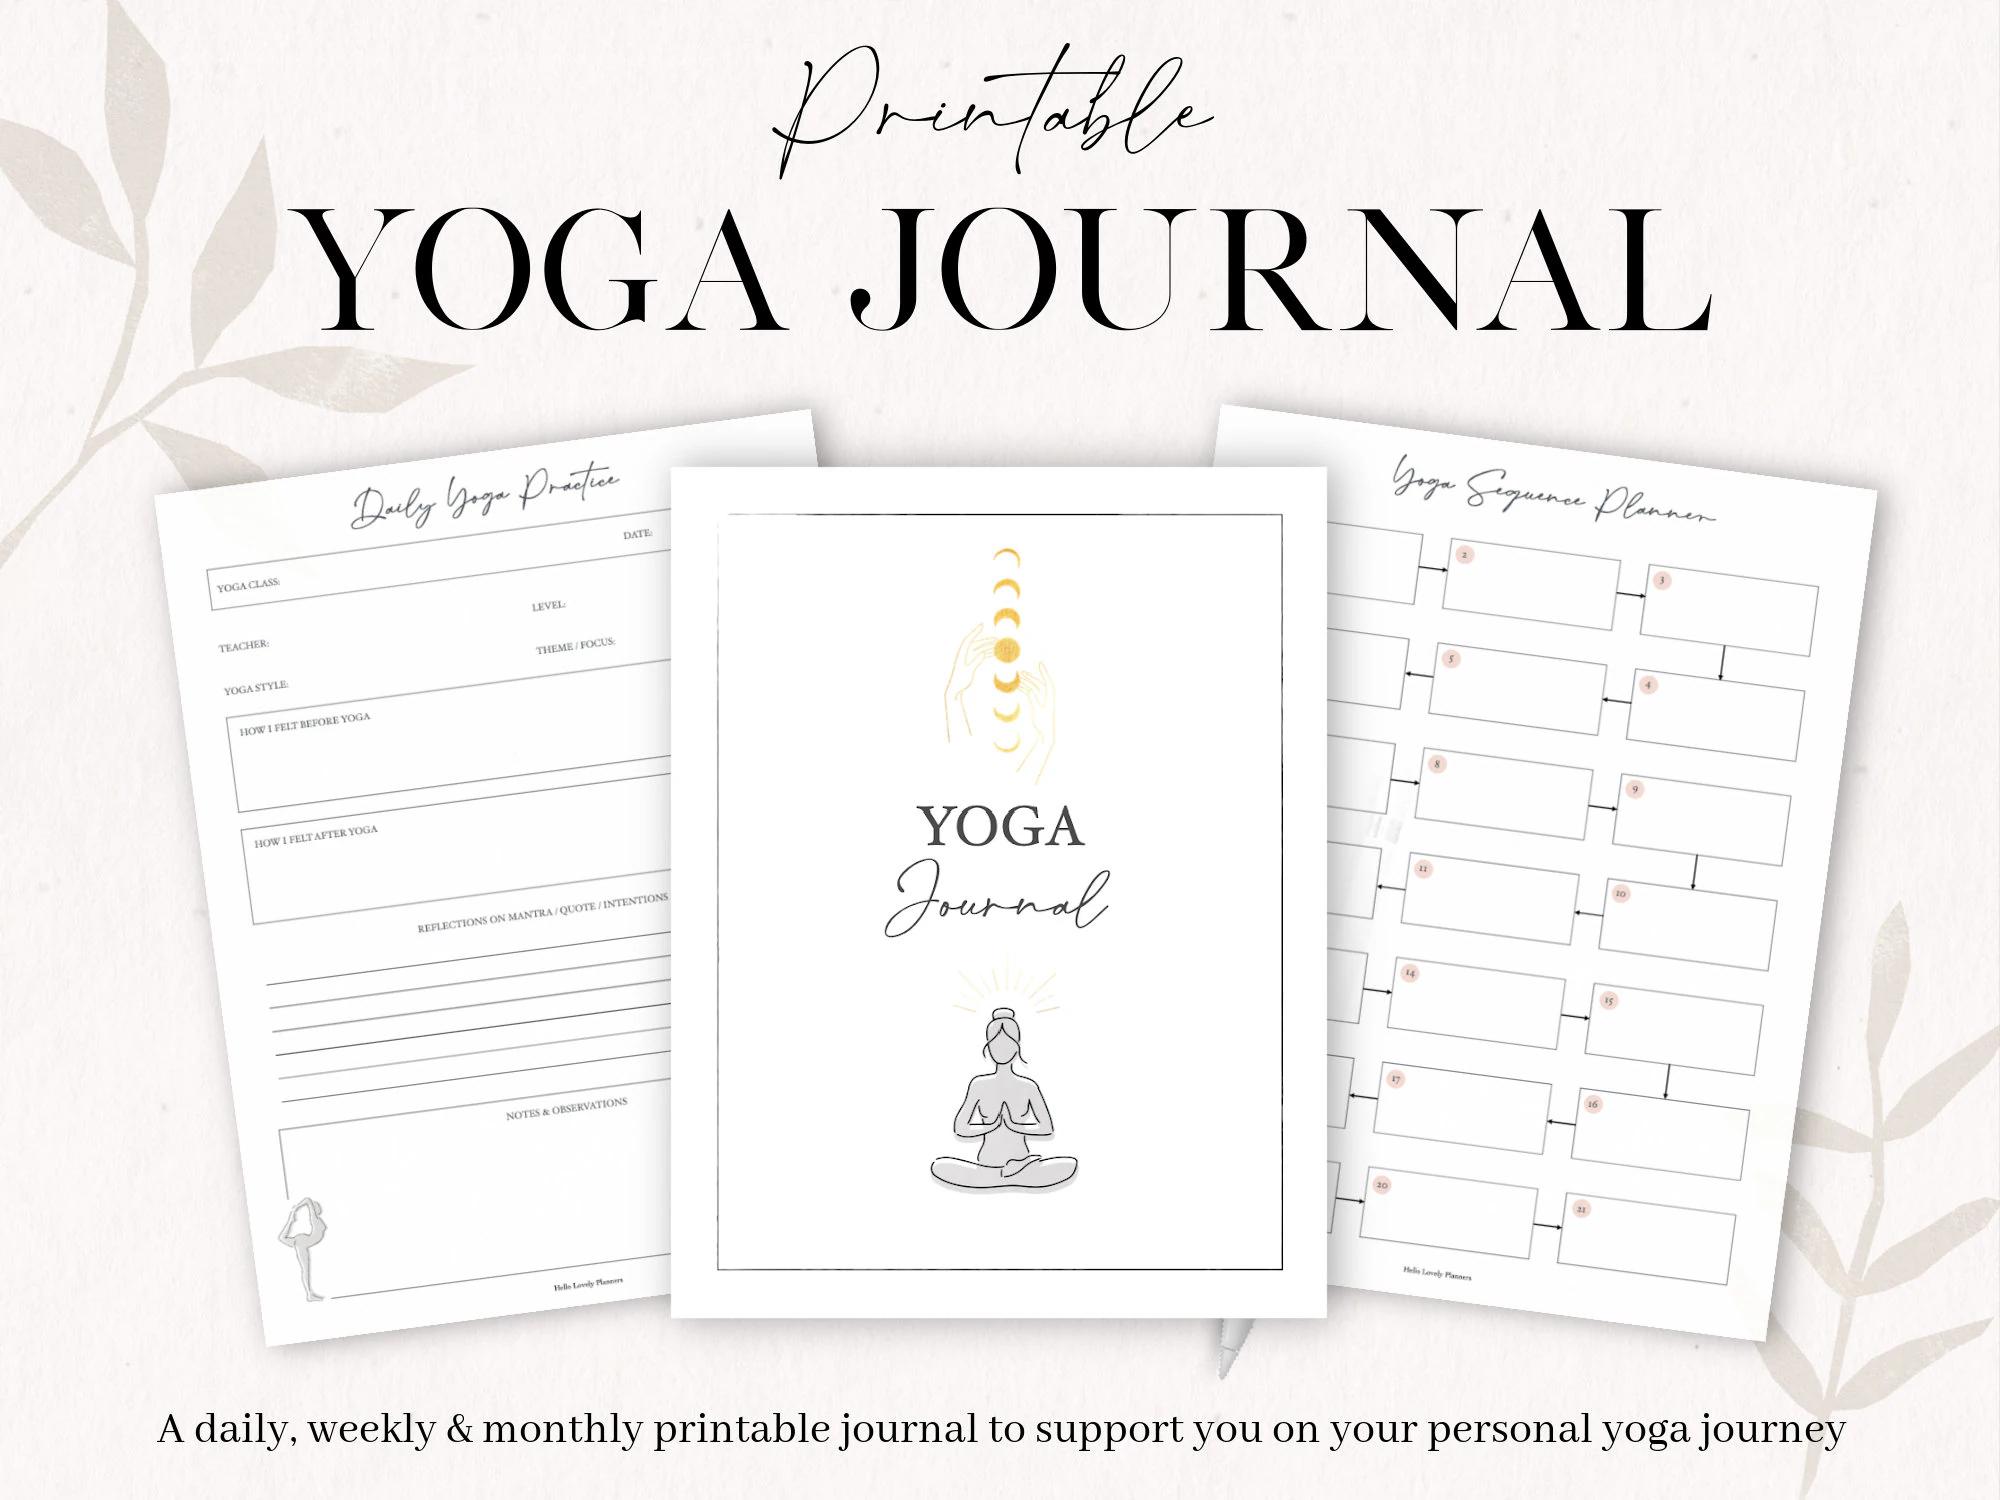 personal yoga journal - What is the point of a yoga journal